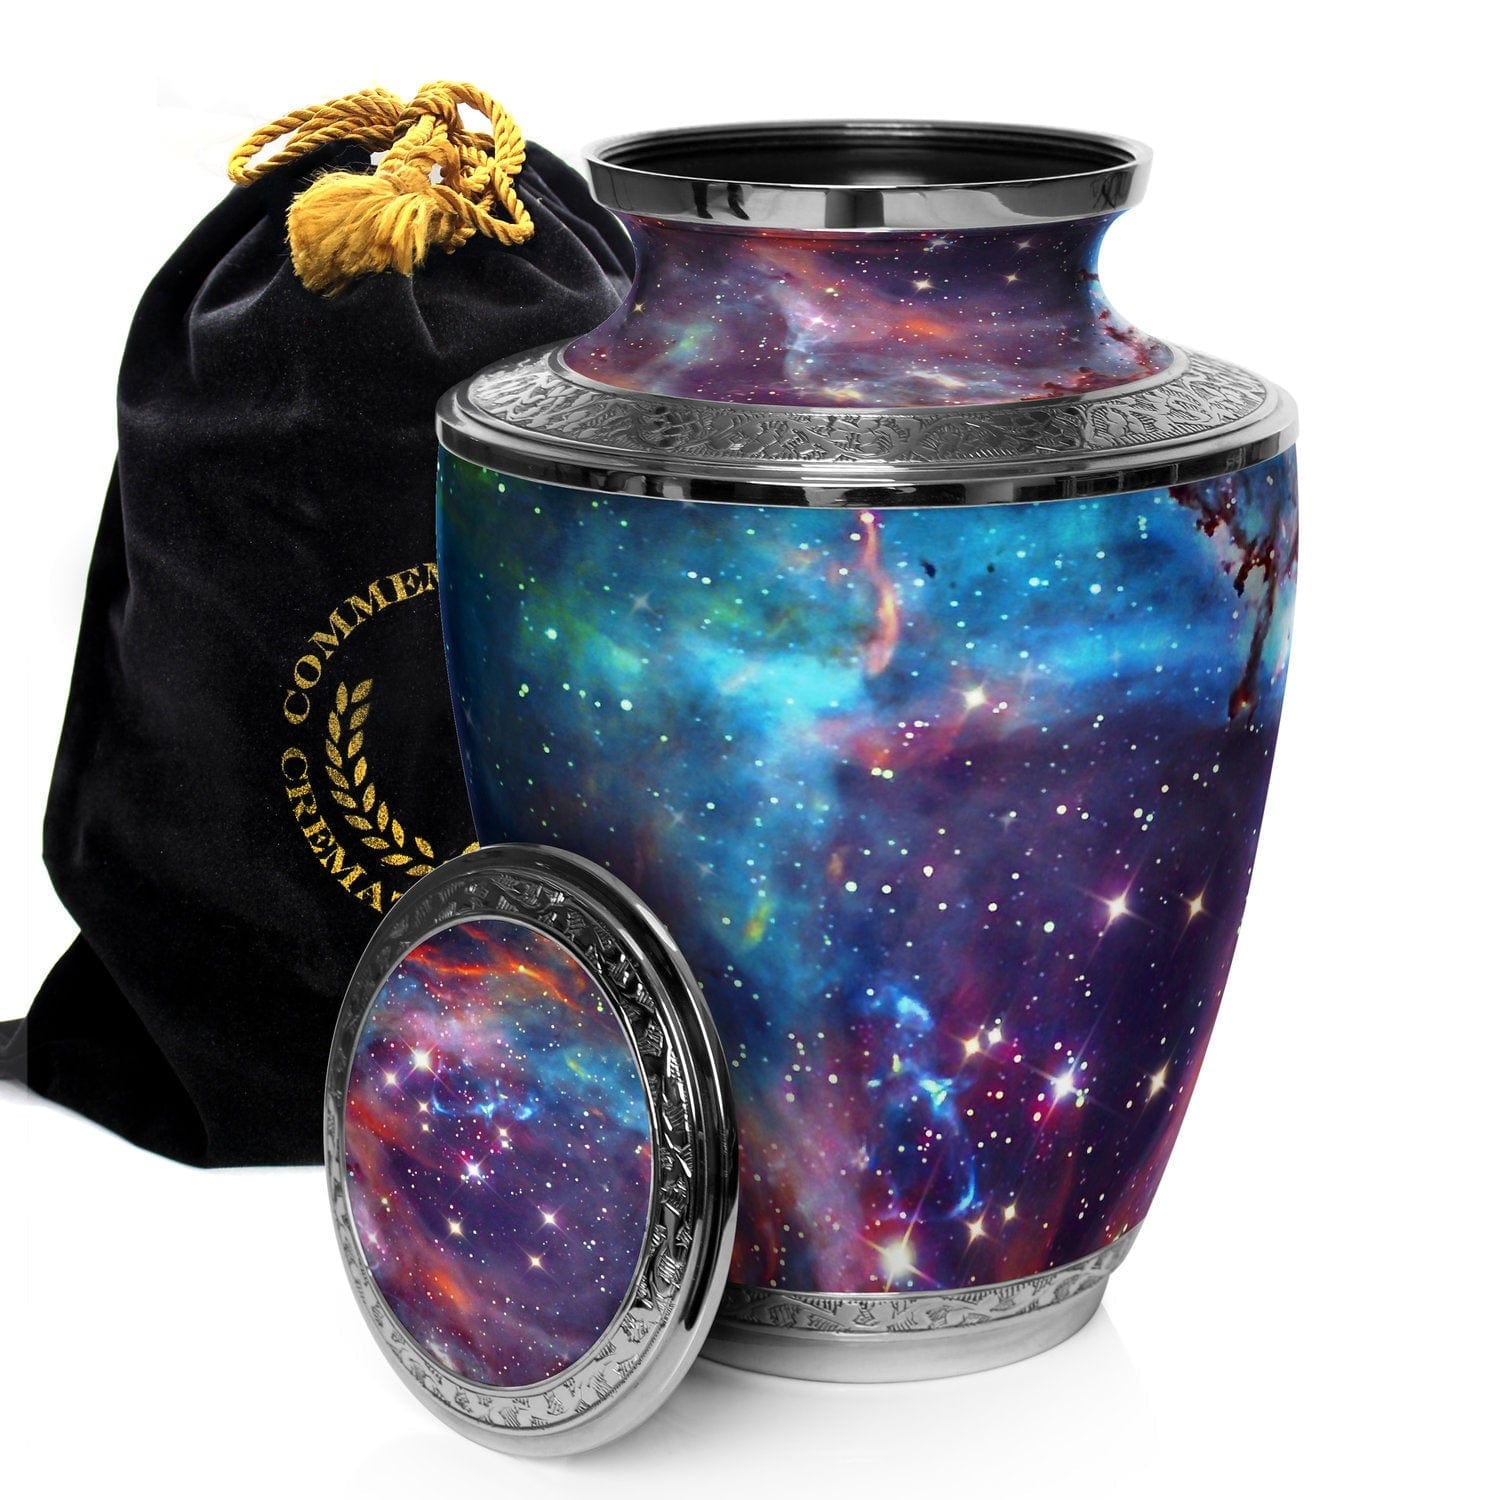 Commemorative Cremation Urns Large Cosmic Galaxy Cremation Urn